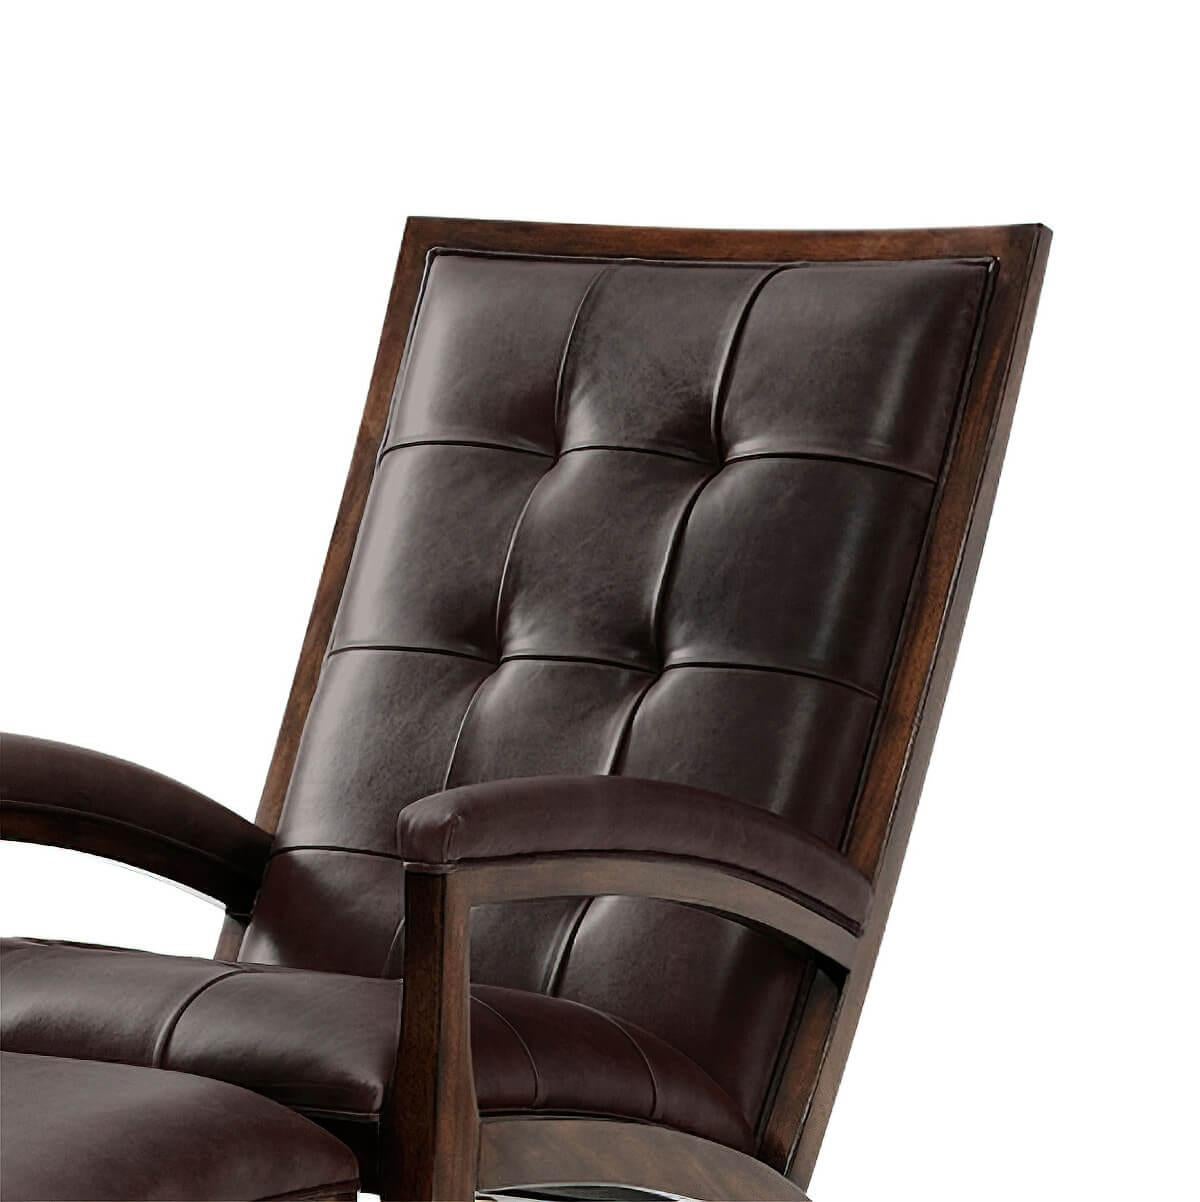 Vietnamese Mid-Century Modern Mahogany and Leather Armchair For Sale